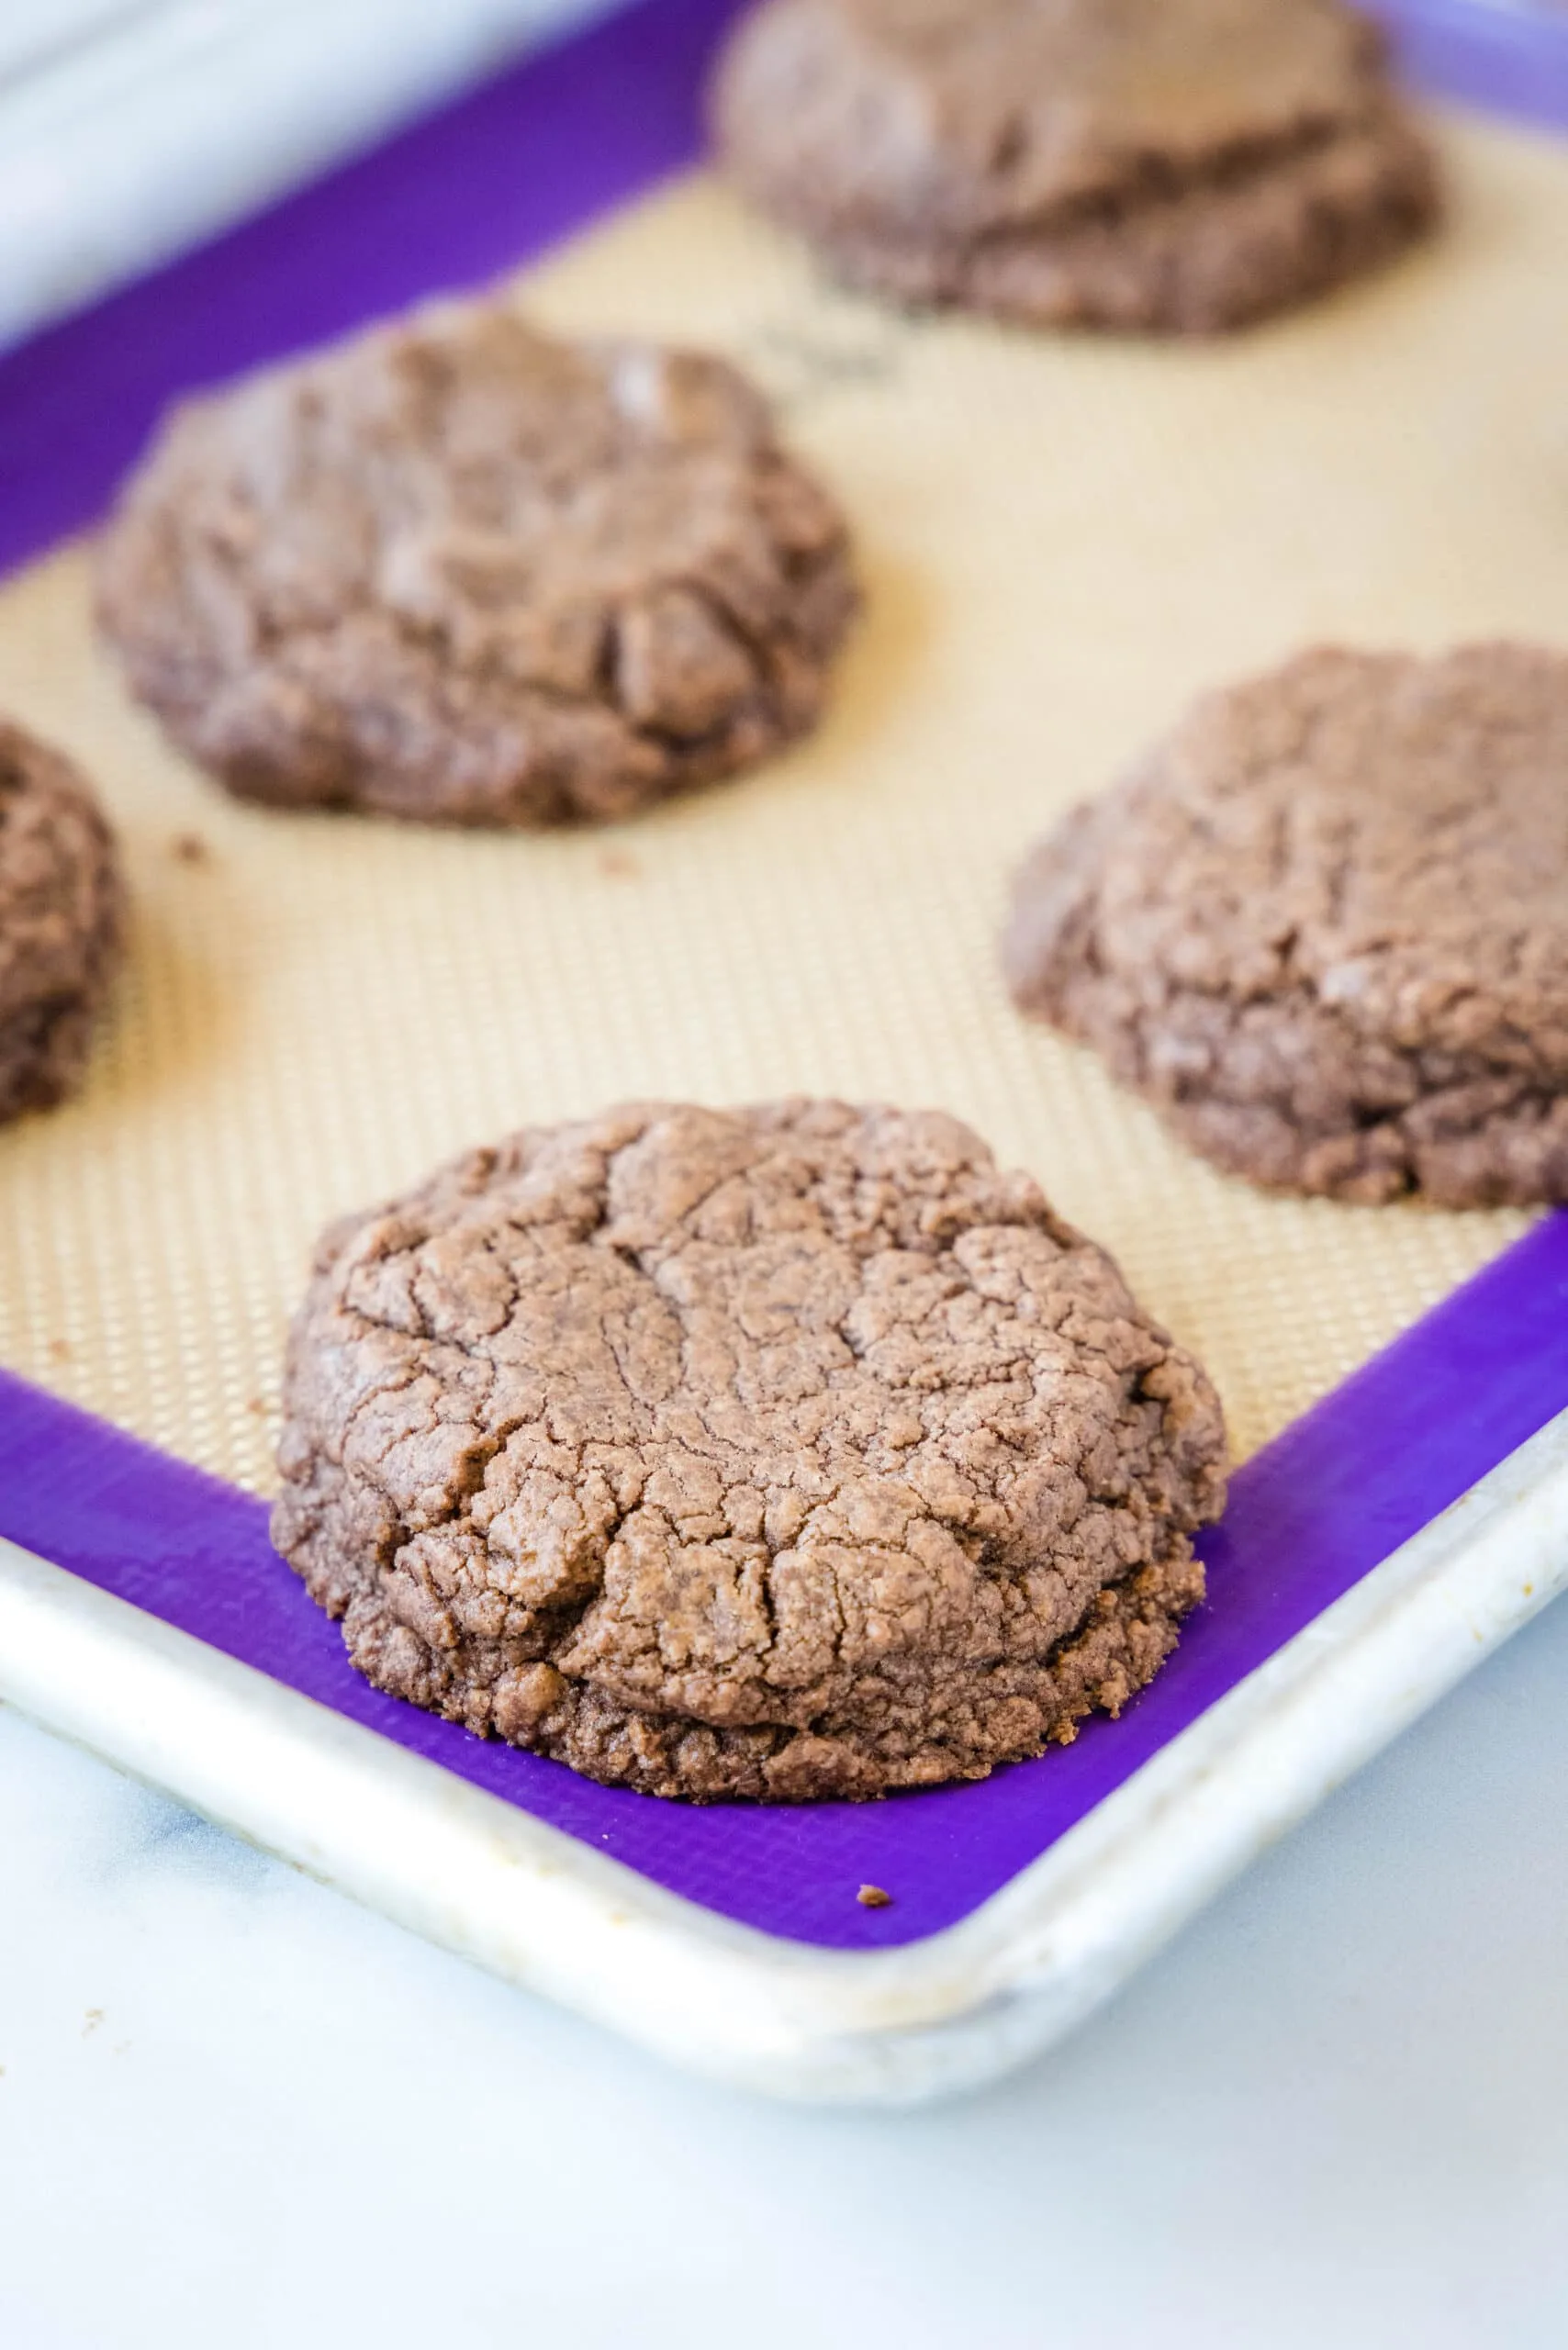 baked chocolate cookies on tray